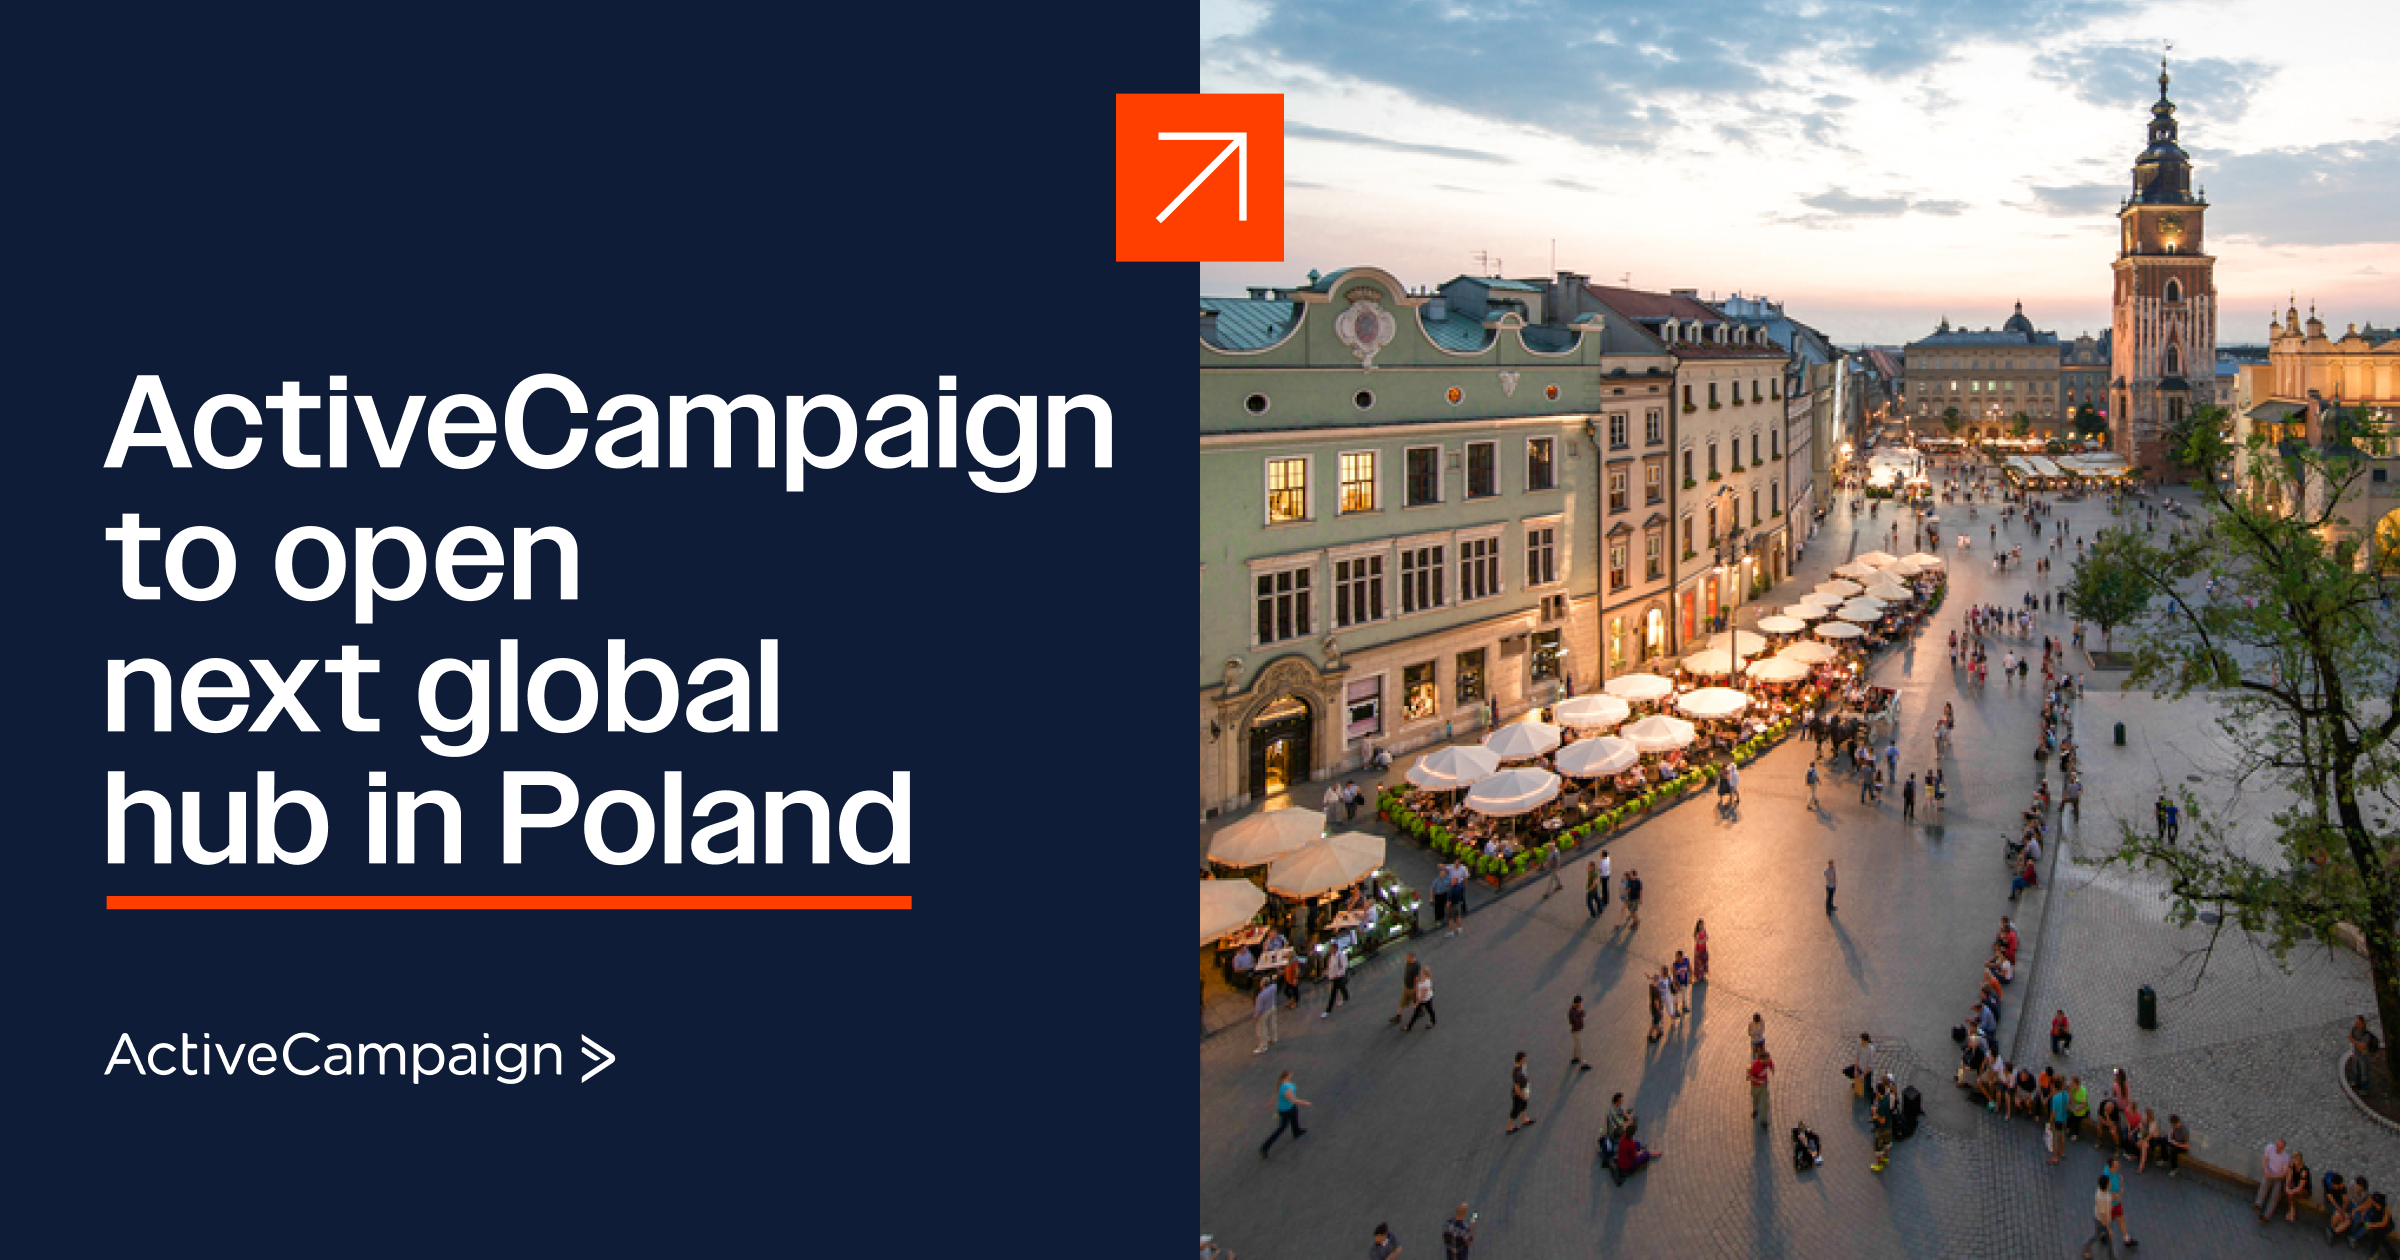 ActiveCampaign Expands Global Reach with New Hub in Krakow, Poland